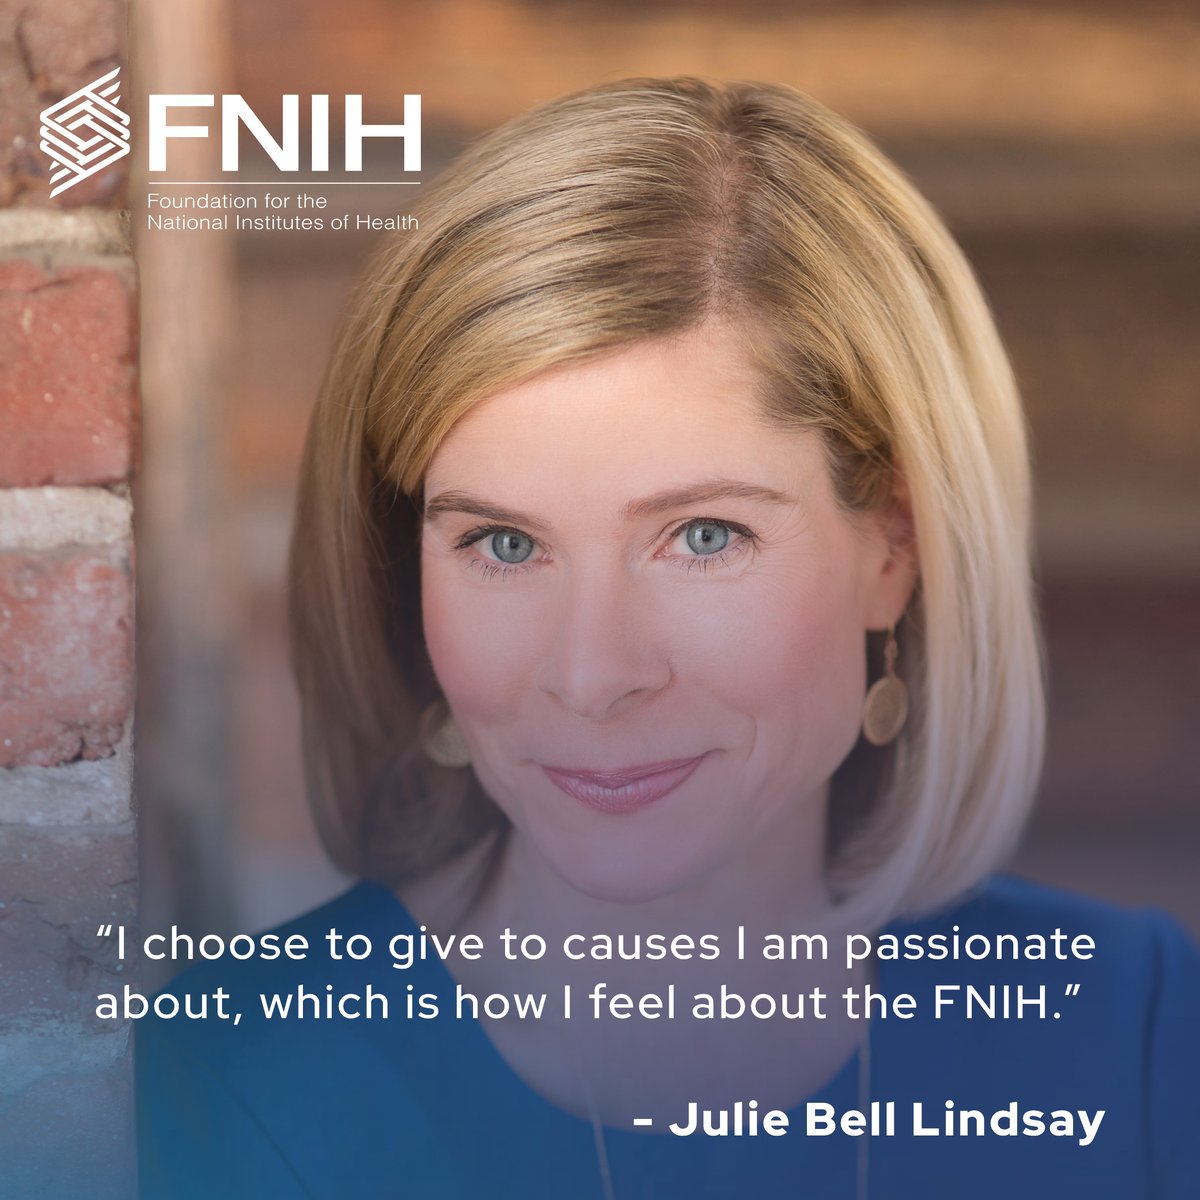 FNIH board member Julie Bell Lindsay shares how her personal experience, witnessing the outstanding care her husband received as a patient at @NIH, led to her passion for supporting the work of the FNIH. Read her full story here:fnih.org/donors/julie-b…